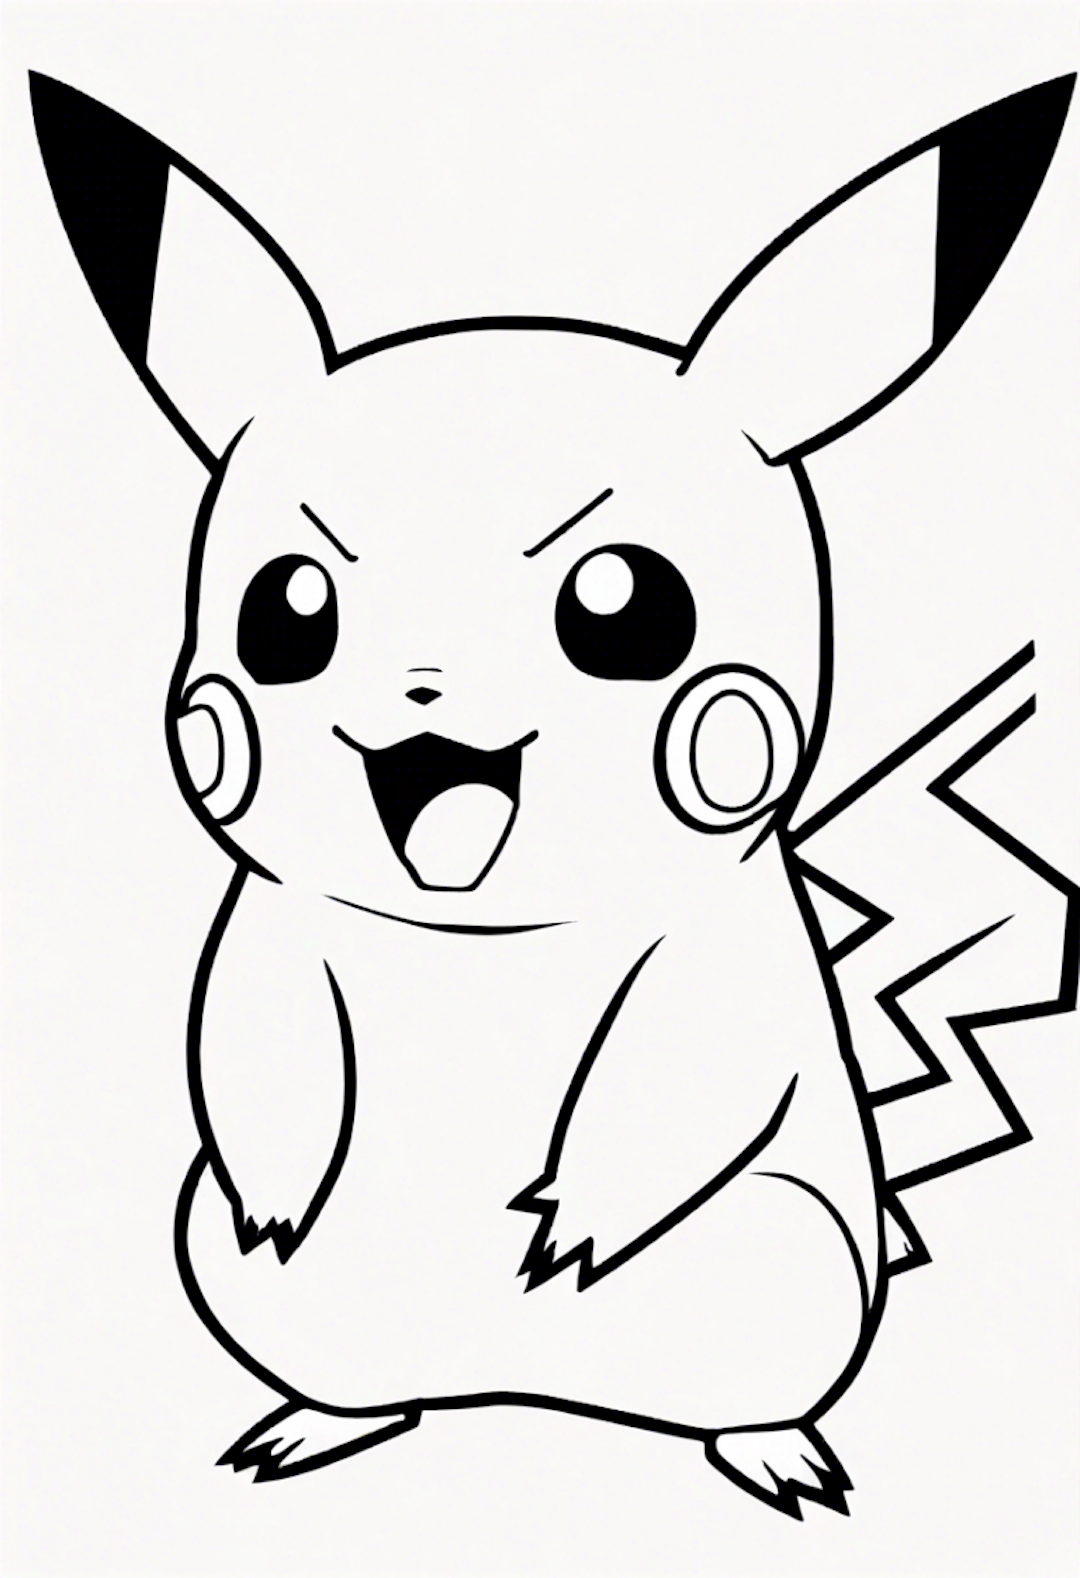 Frustrated Pikachu coloring pages